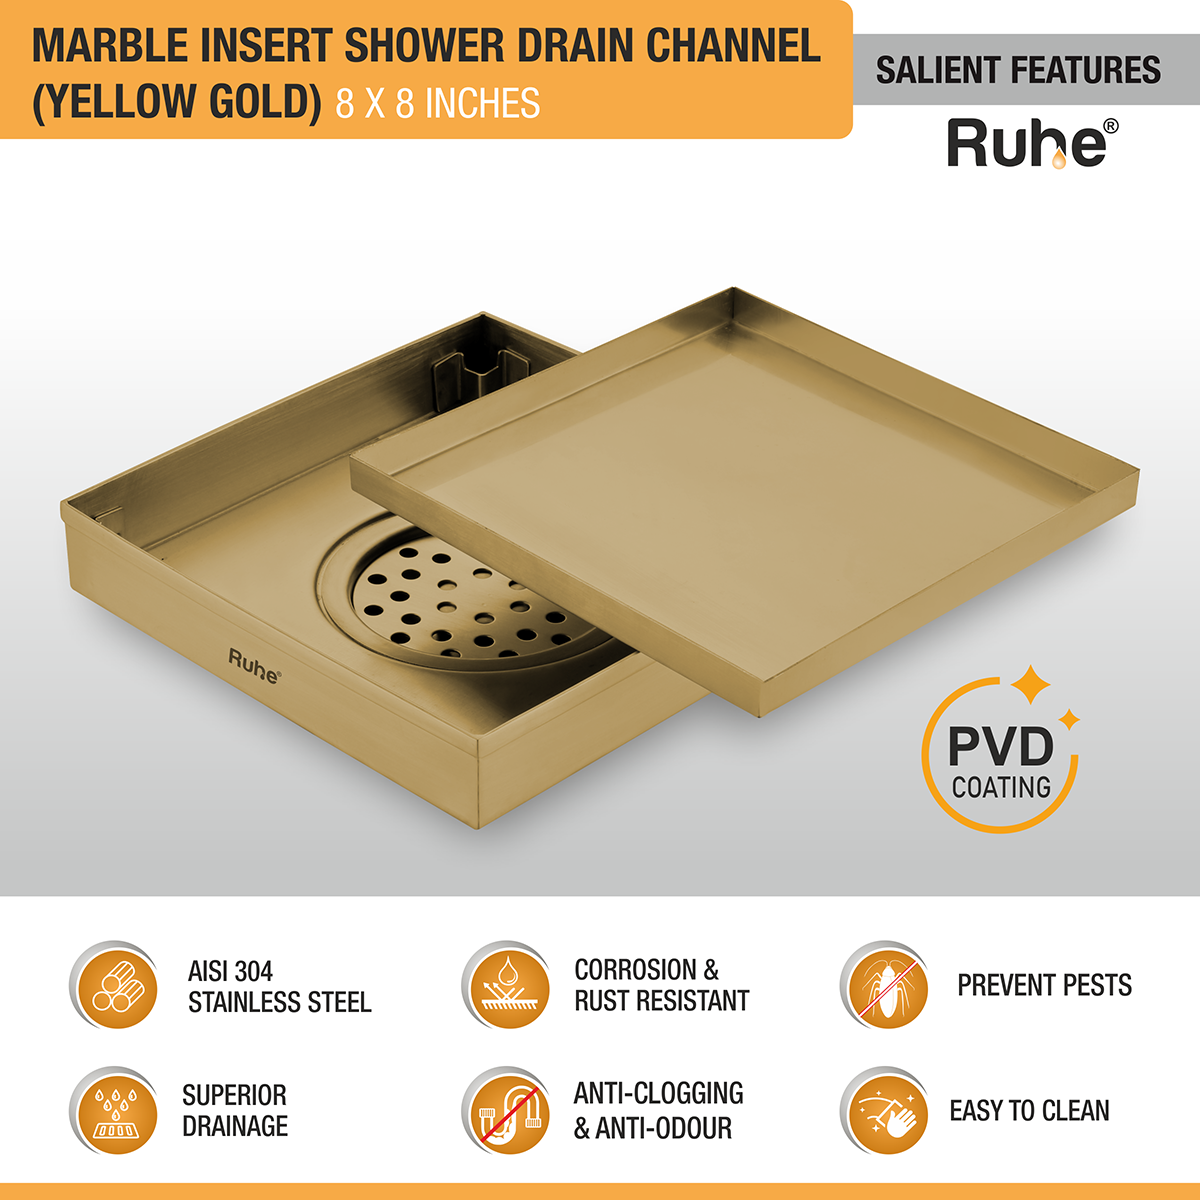 Marble Insert Shower Drain Channel (8 x 8 Inches) YELLOW GOLD PVD Coated features and benefits